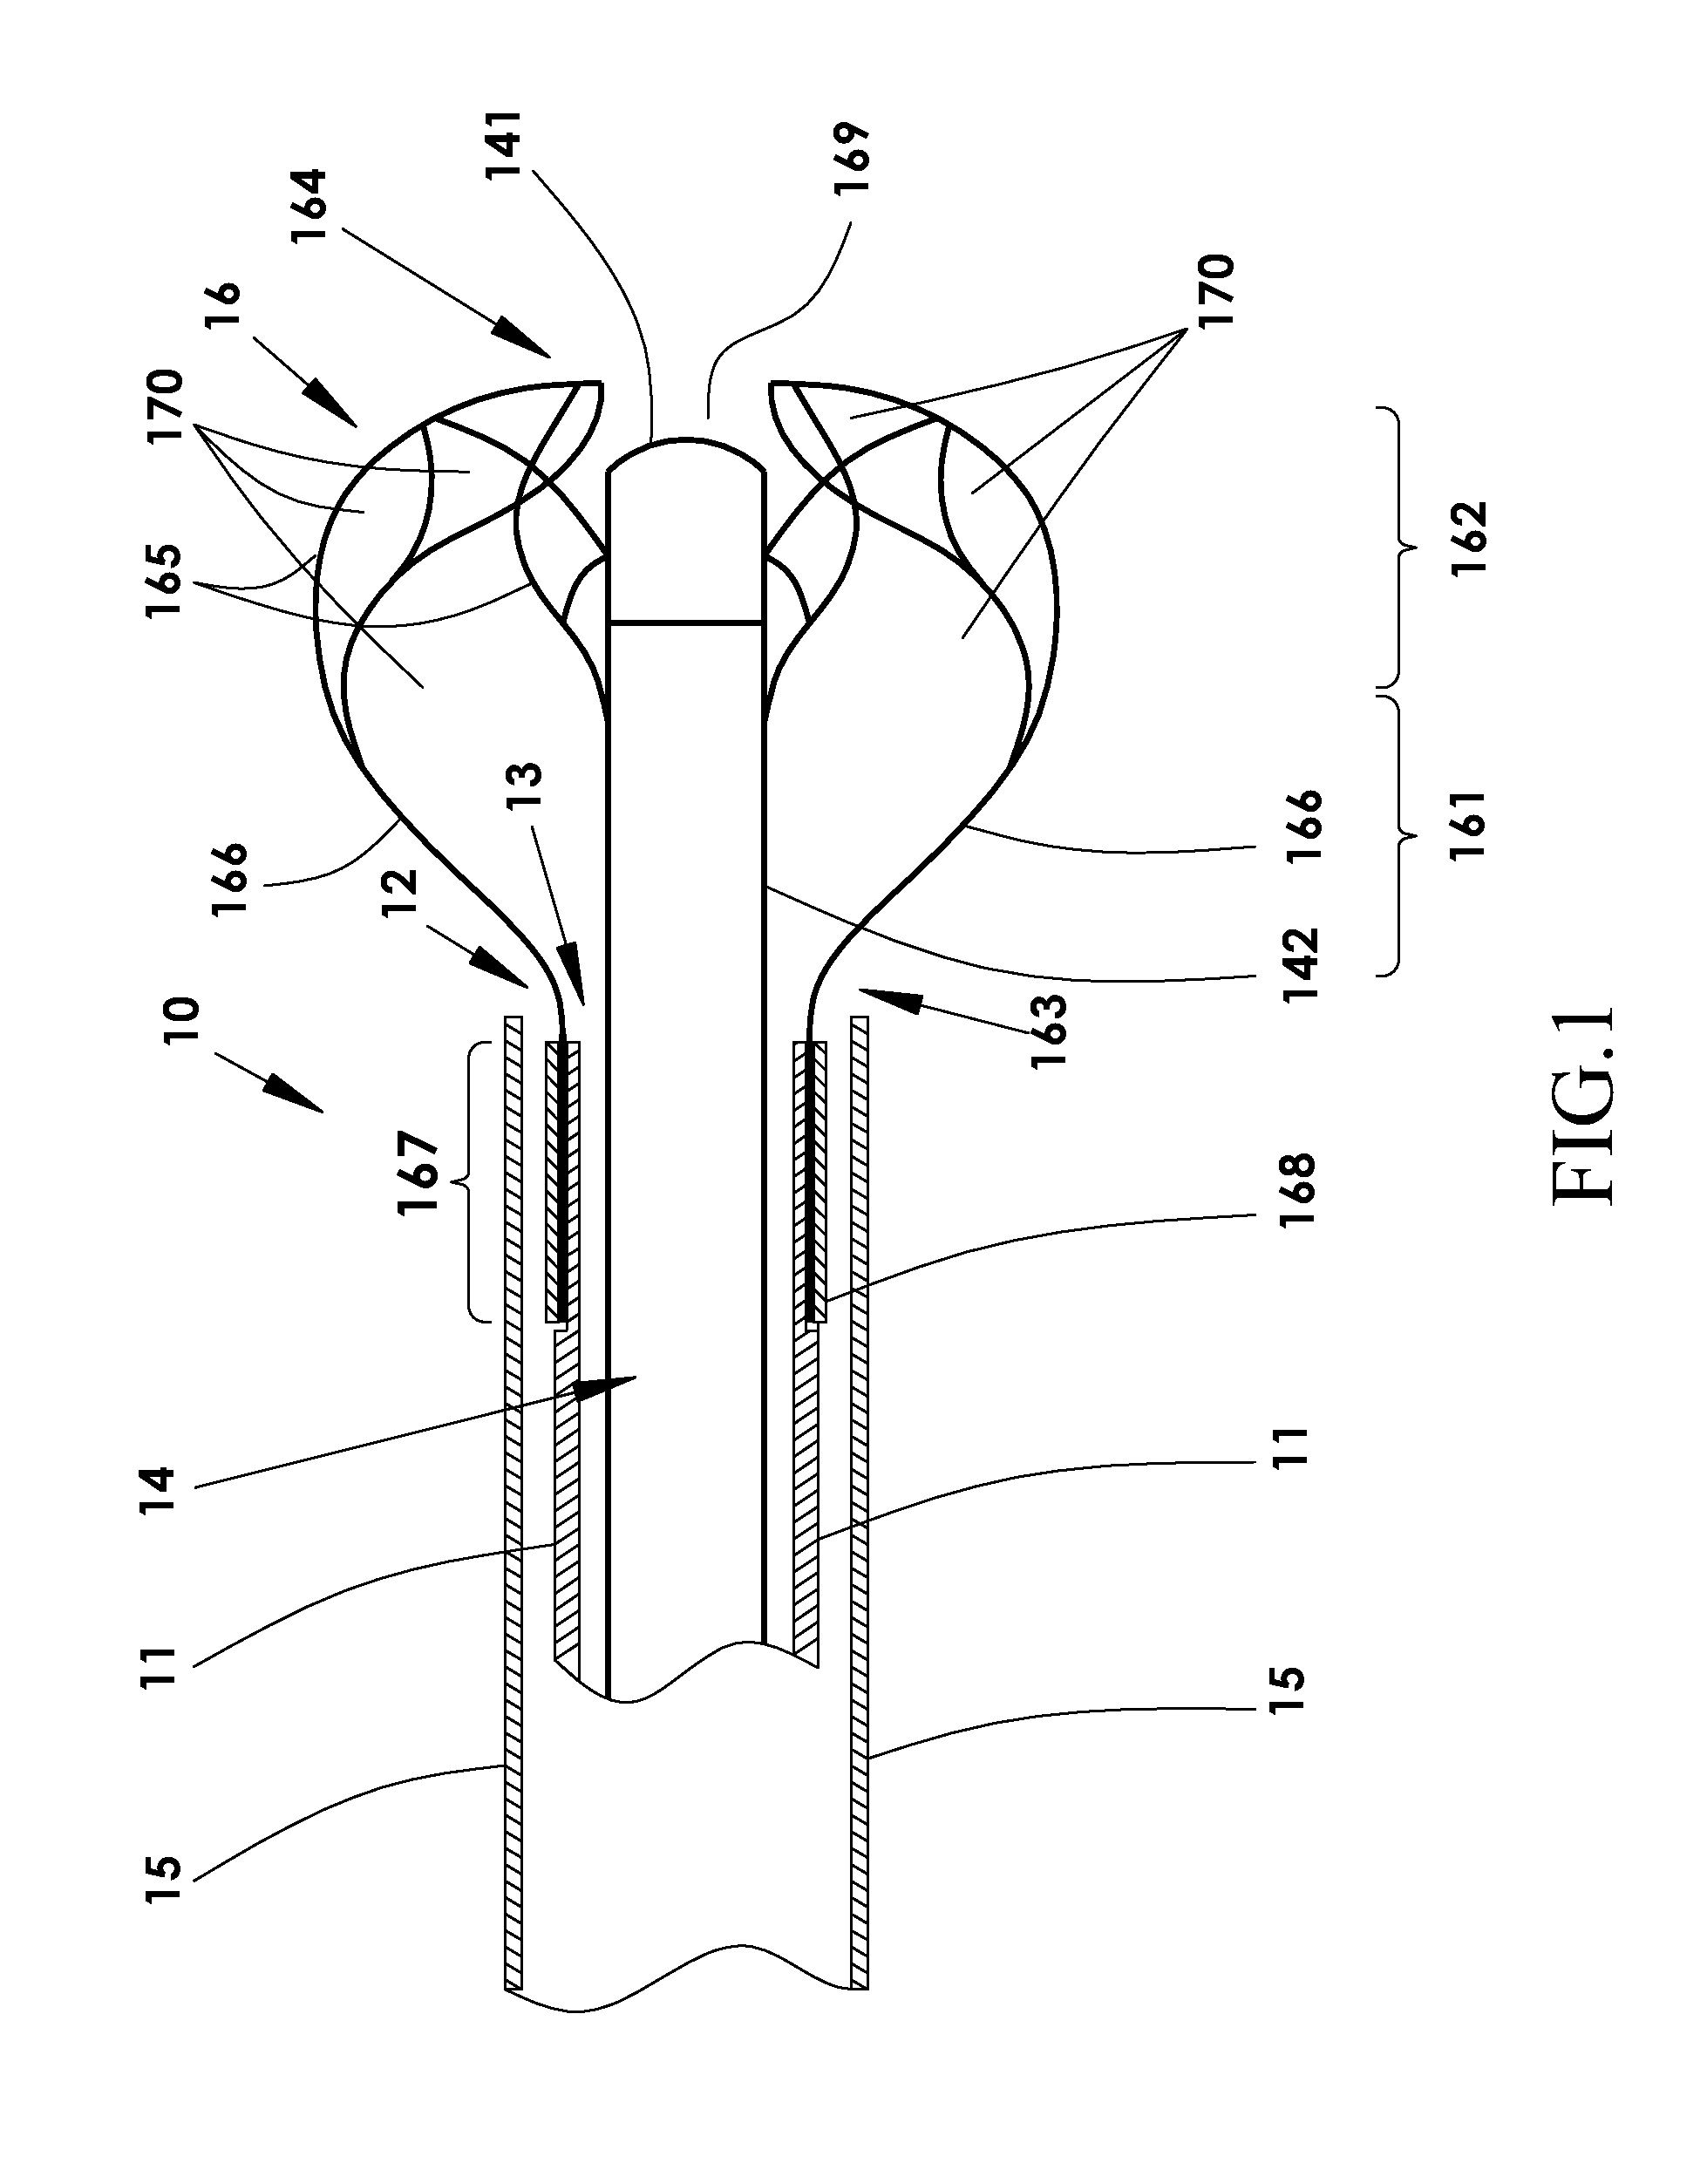 Device and method for fragmenting and removing concretions from body ducts and cavities